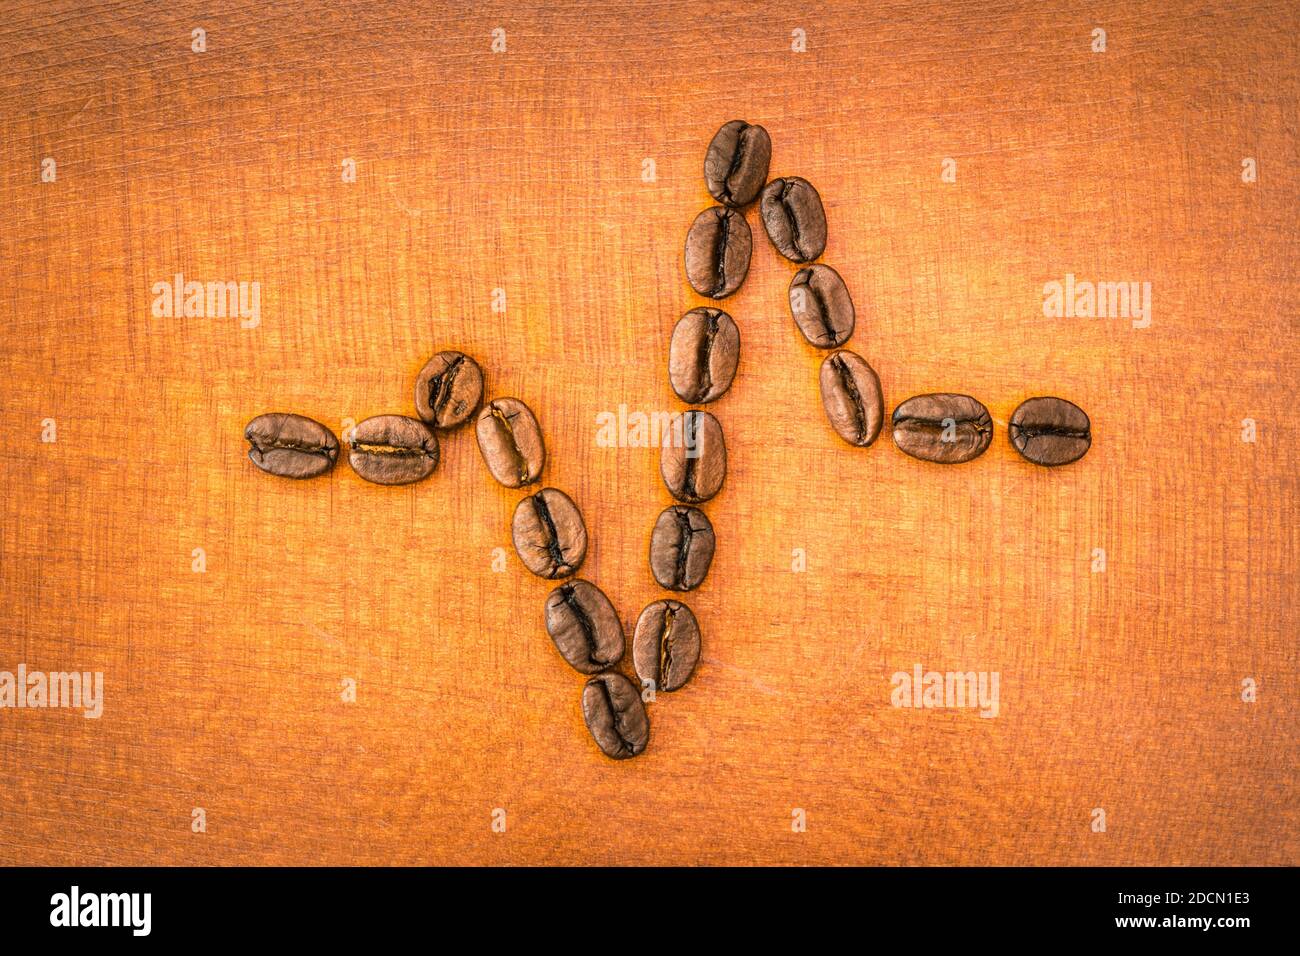 Roasted coffee beans forming a heartbeat lifeline on wood symbolizing vitality and energy in life Stock Photo